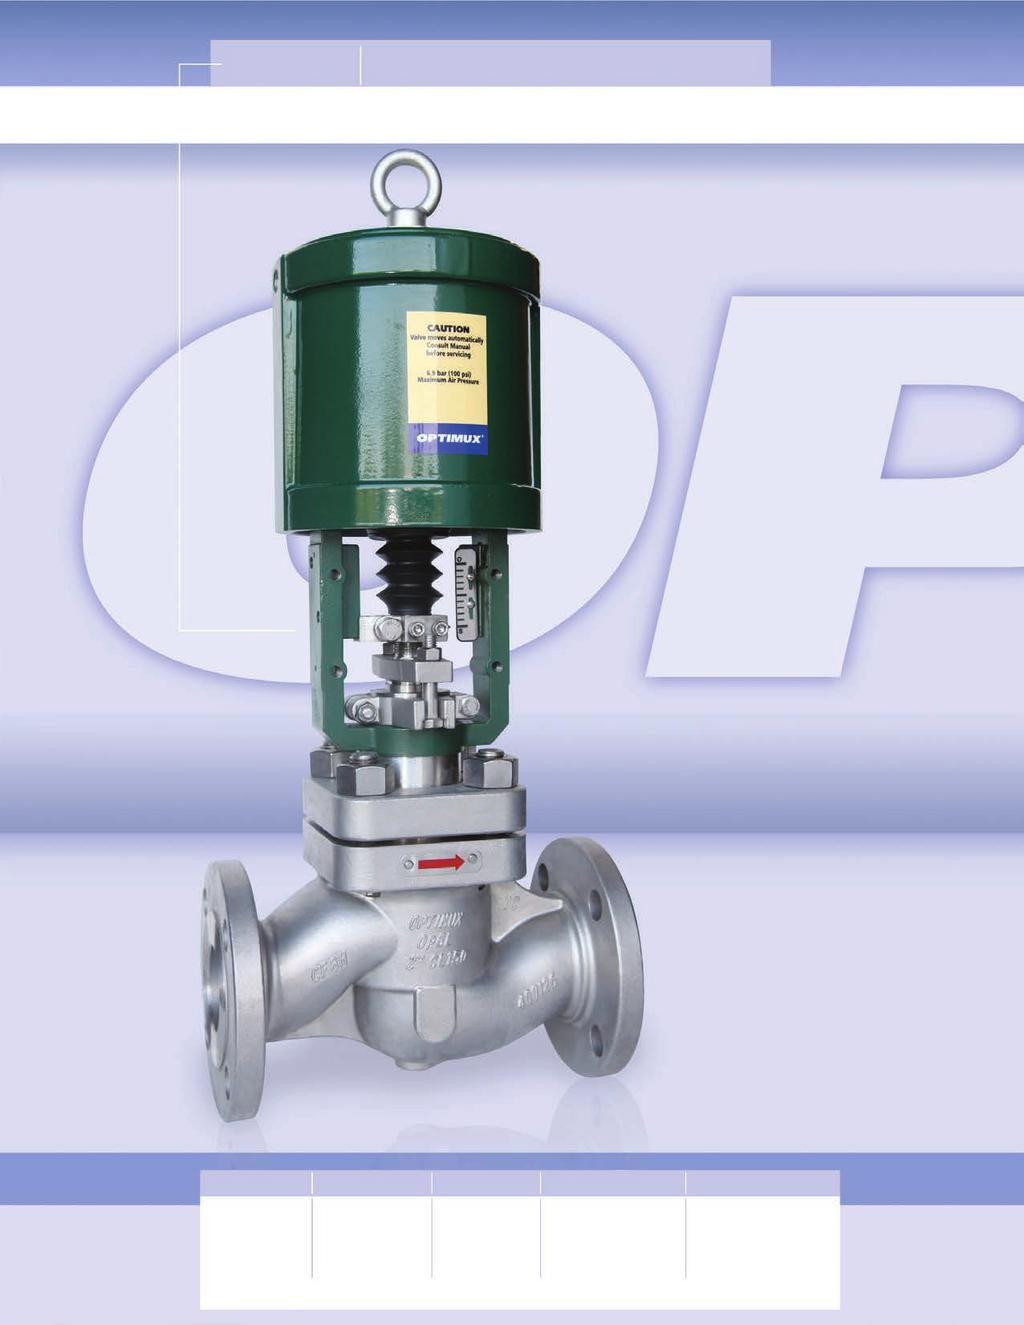 OpGL TM Globe Control Valve Reliable. Rugged. Economical. Optimux OpGL TM globe control valves offer superior performance while allowing for quick, easy, and cost- effective maintenance.